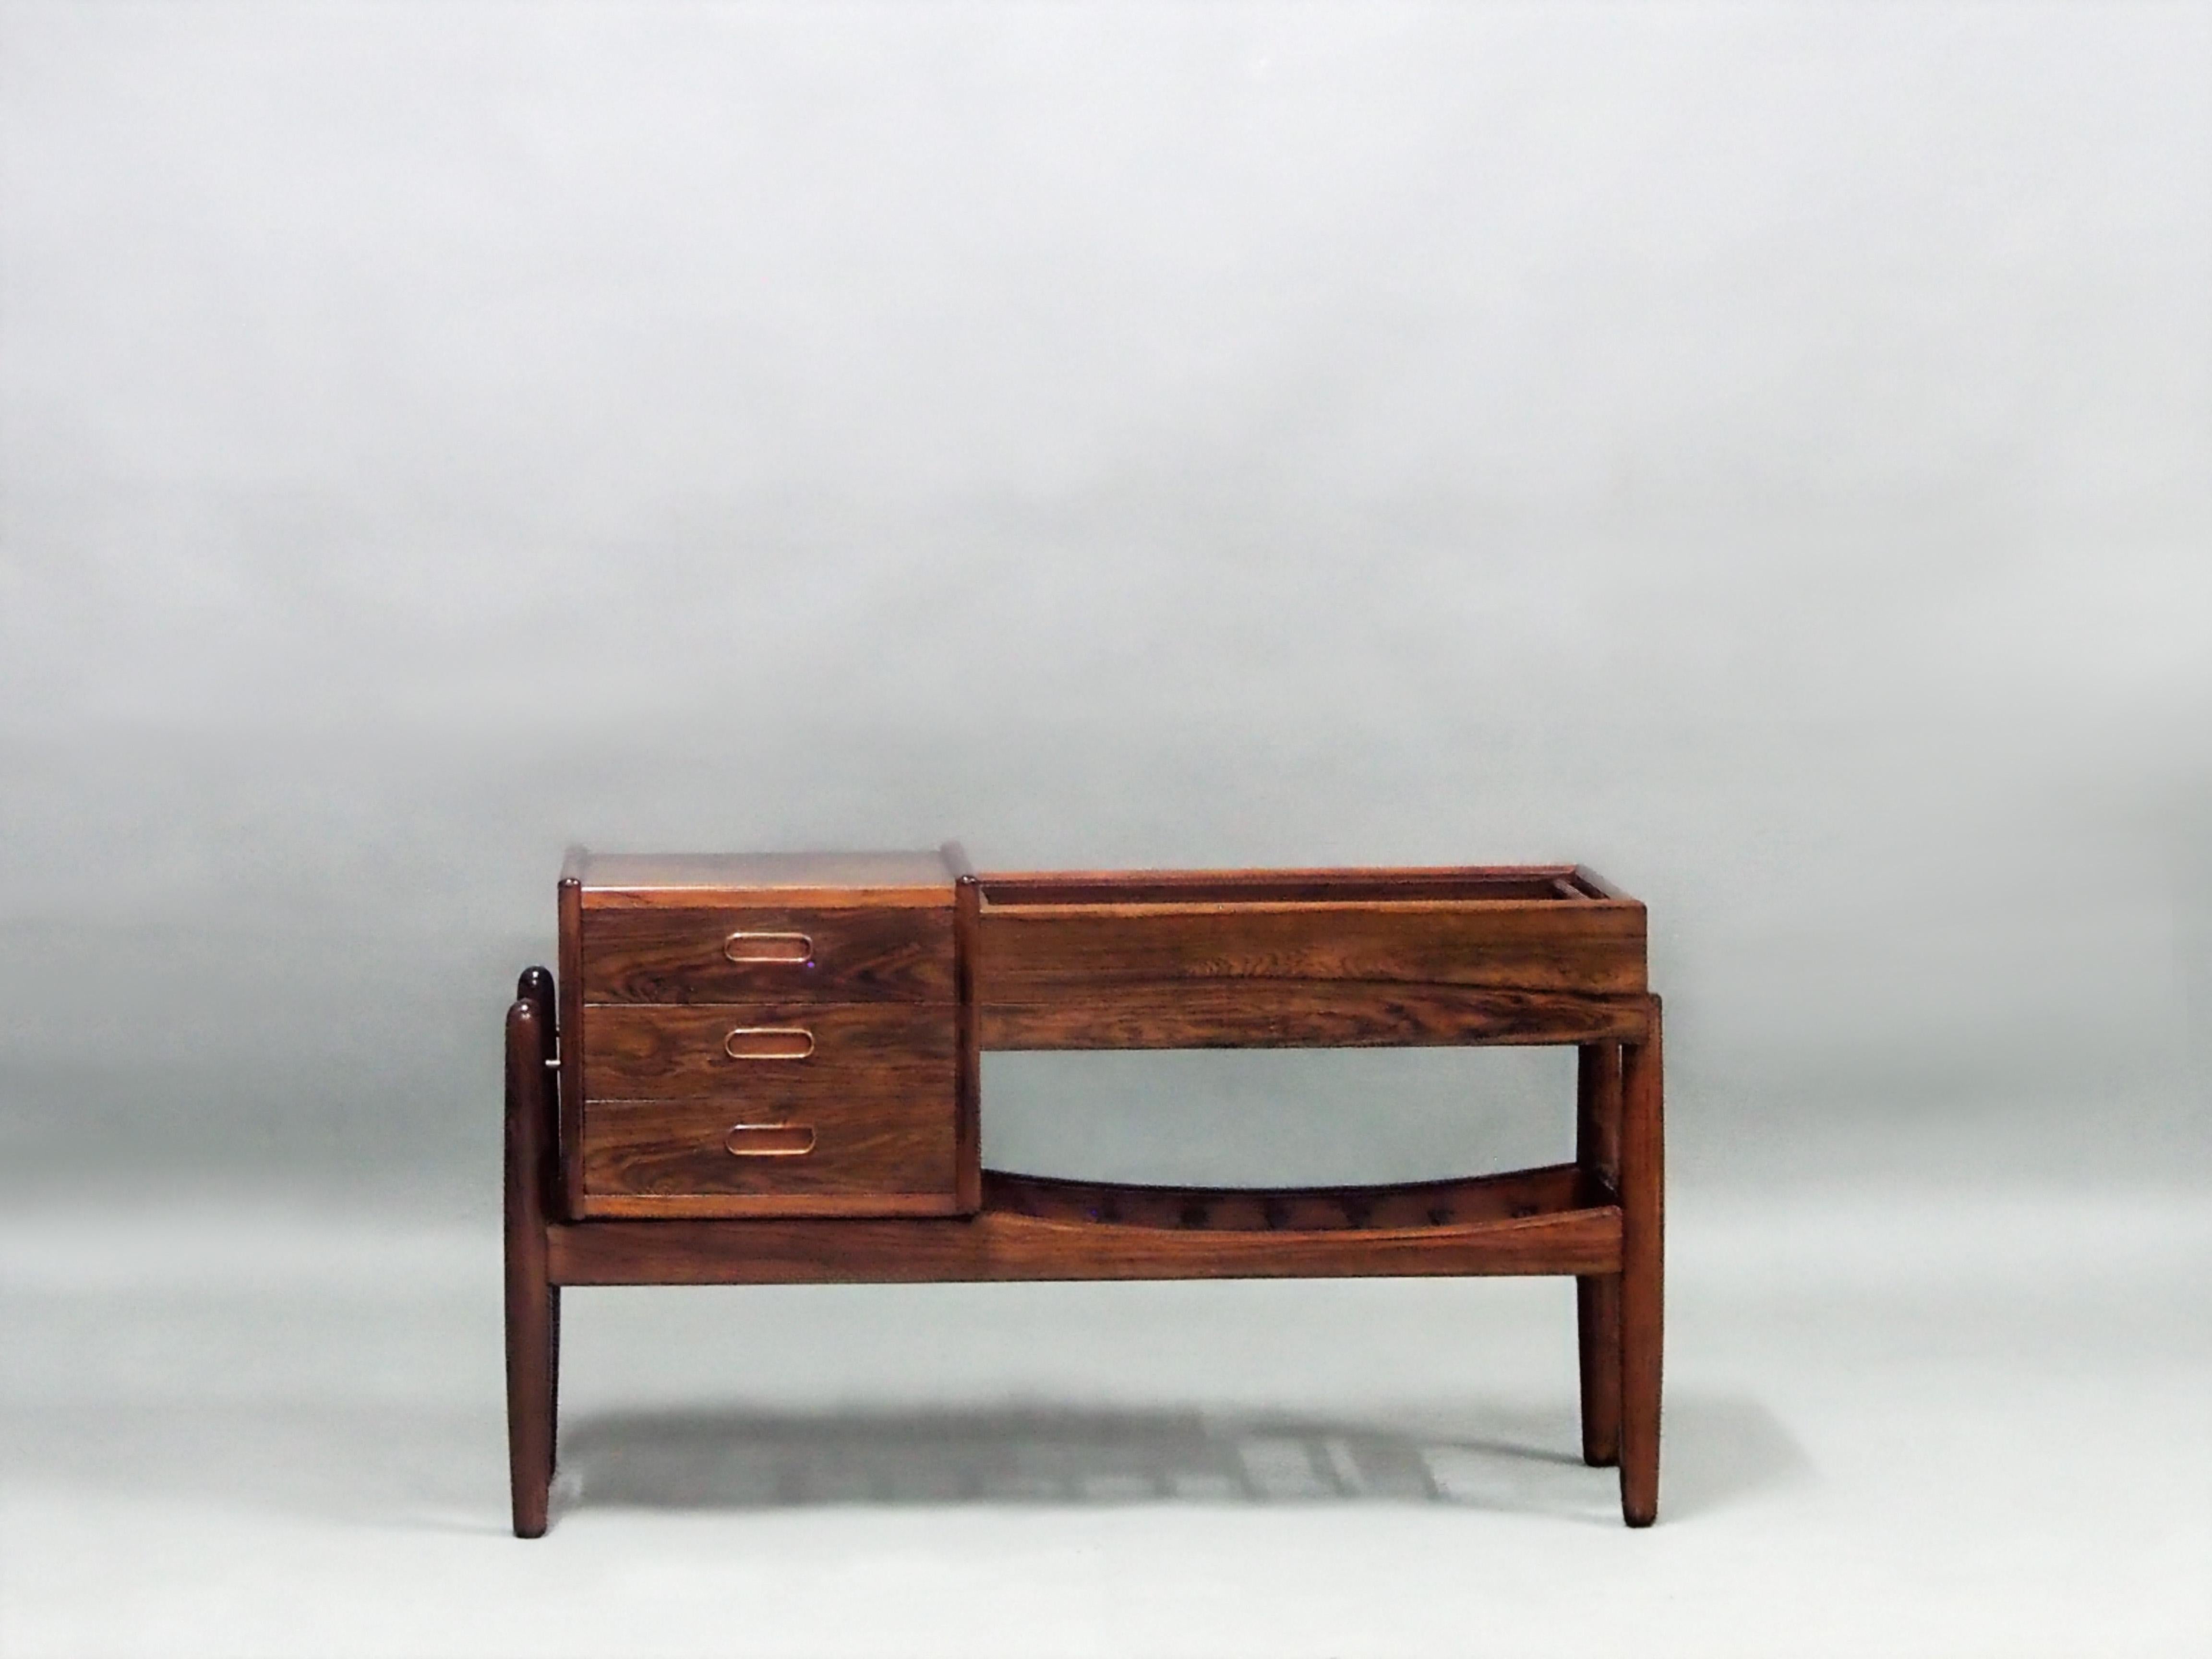 Arne Wahl Iversen Rosewood Planter console table.